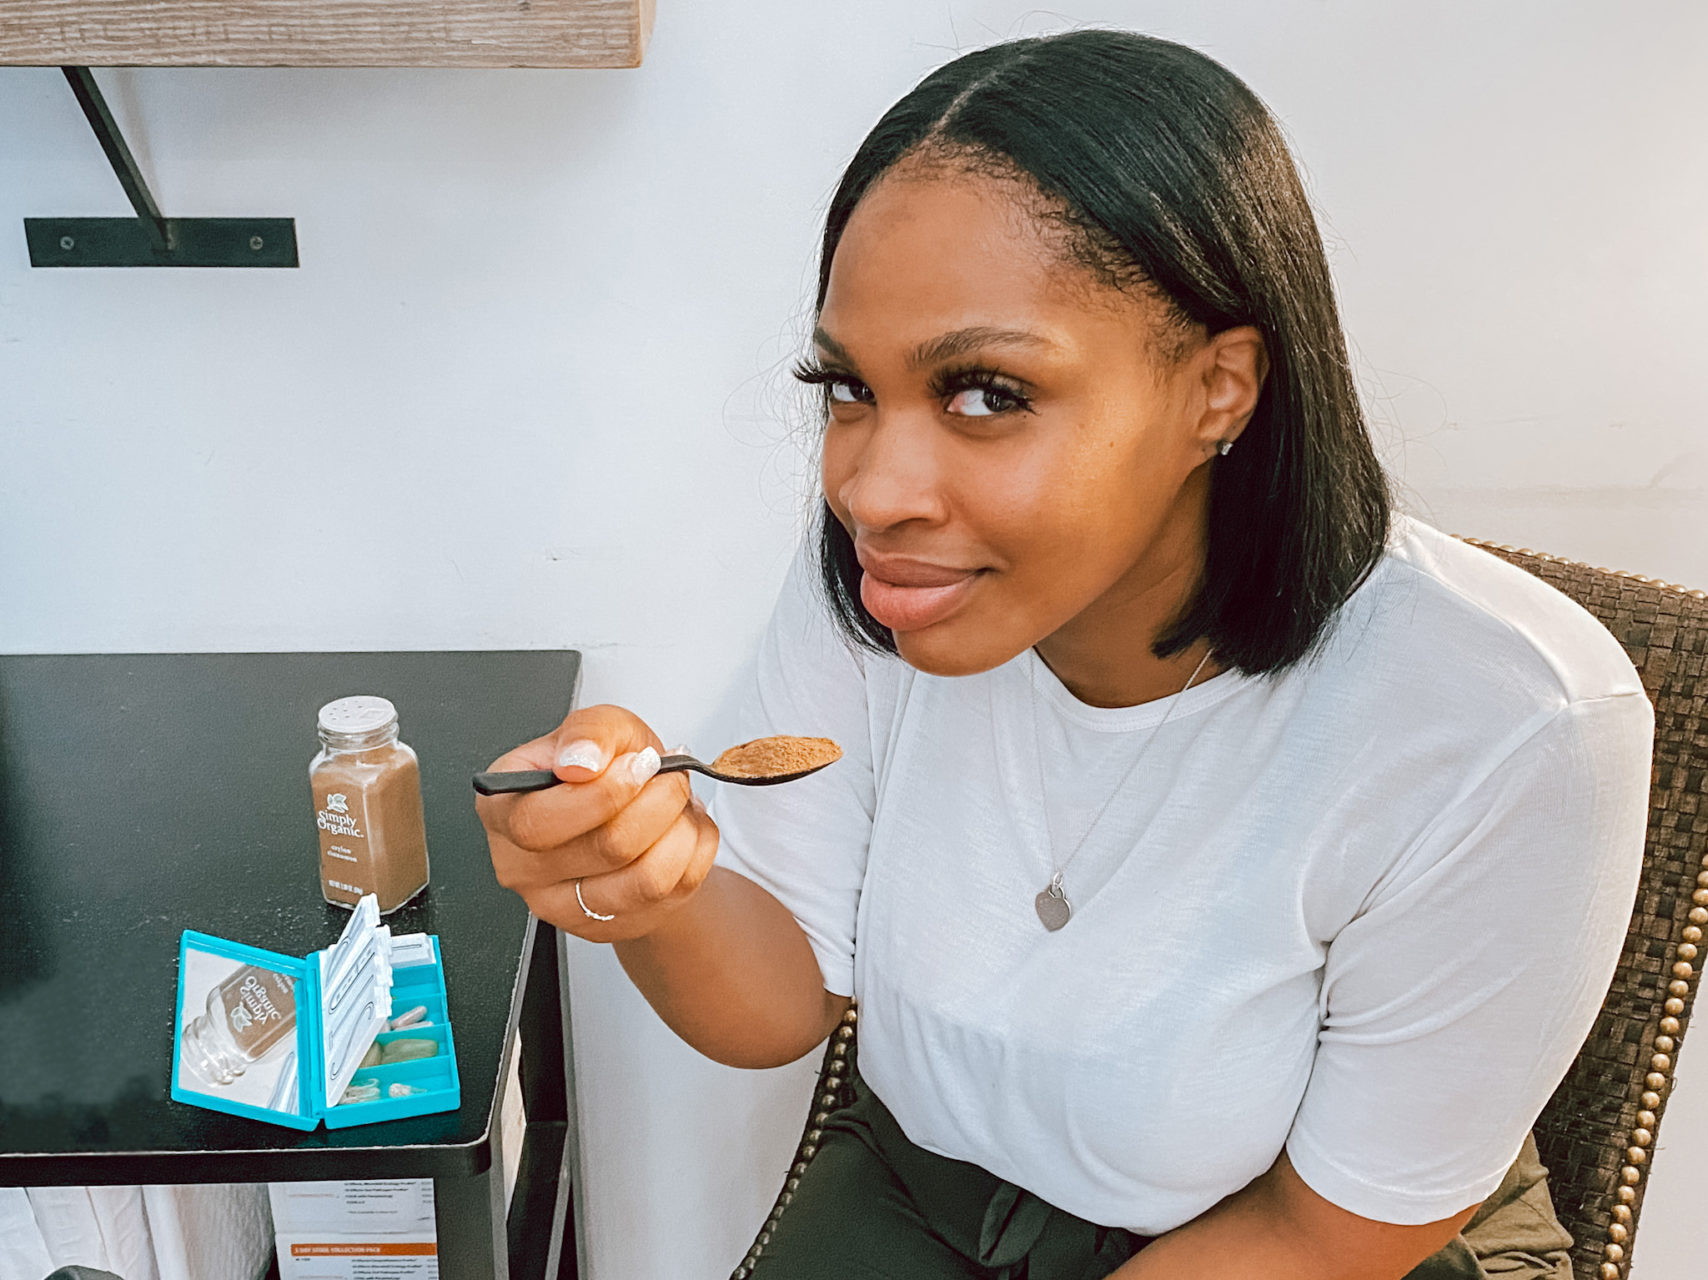 Shiann from Physio Logic NYC in Brooklyn, NY holding up a spoonful of cinnamon with her supplements to demonstrate the health benefits of cinnamon.